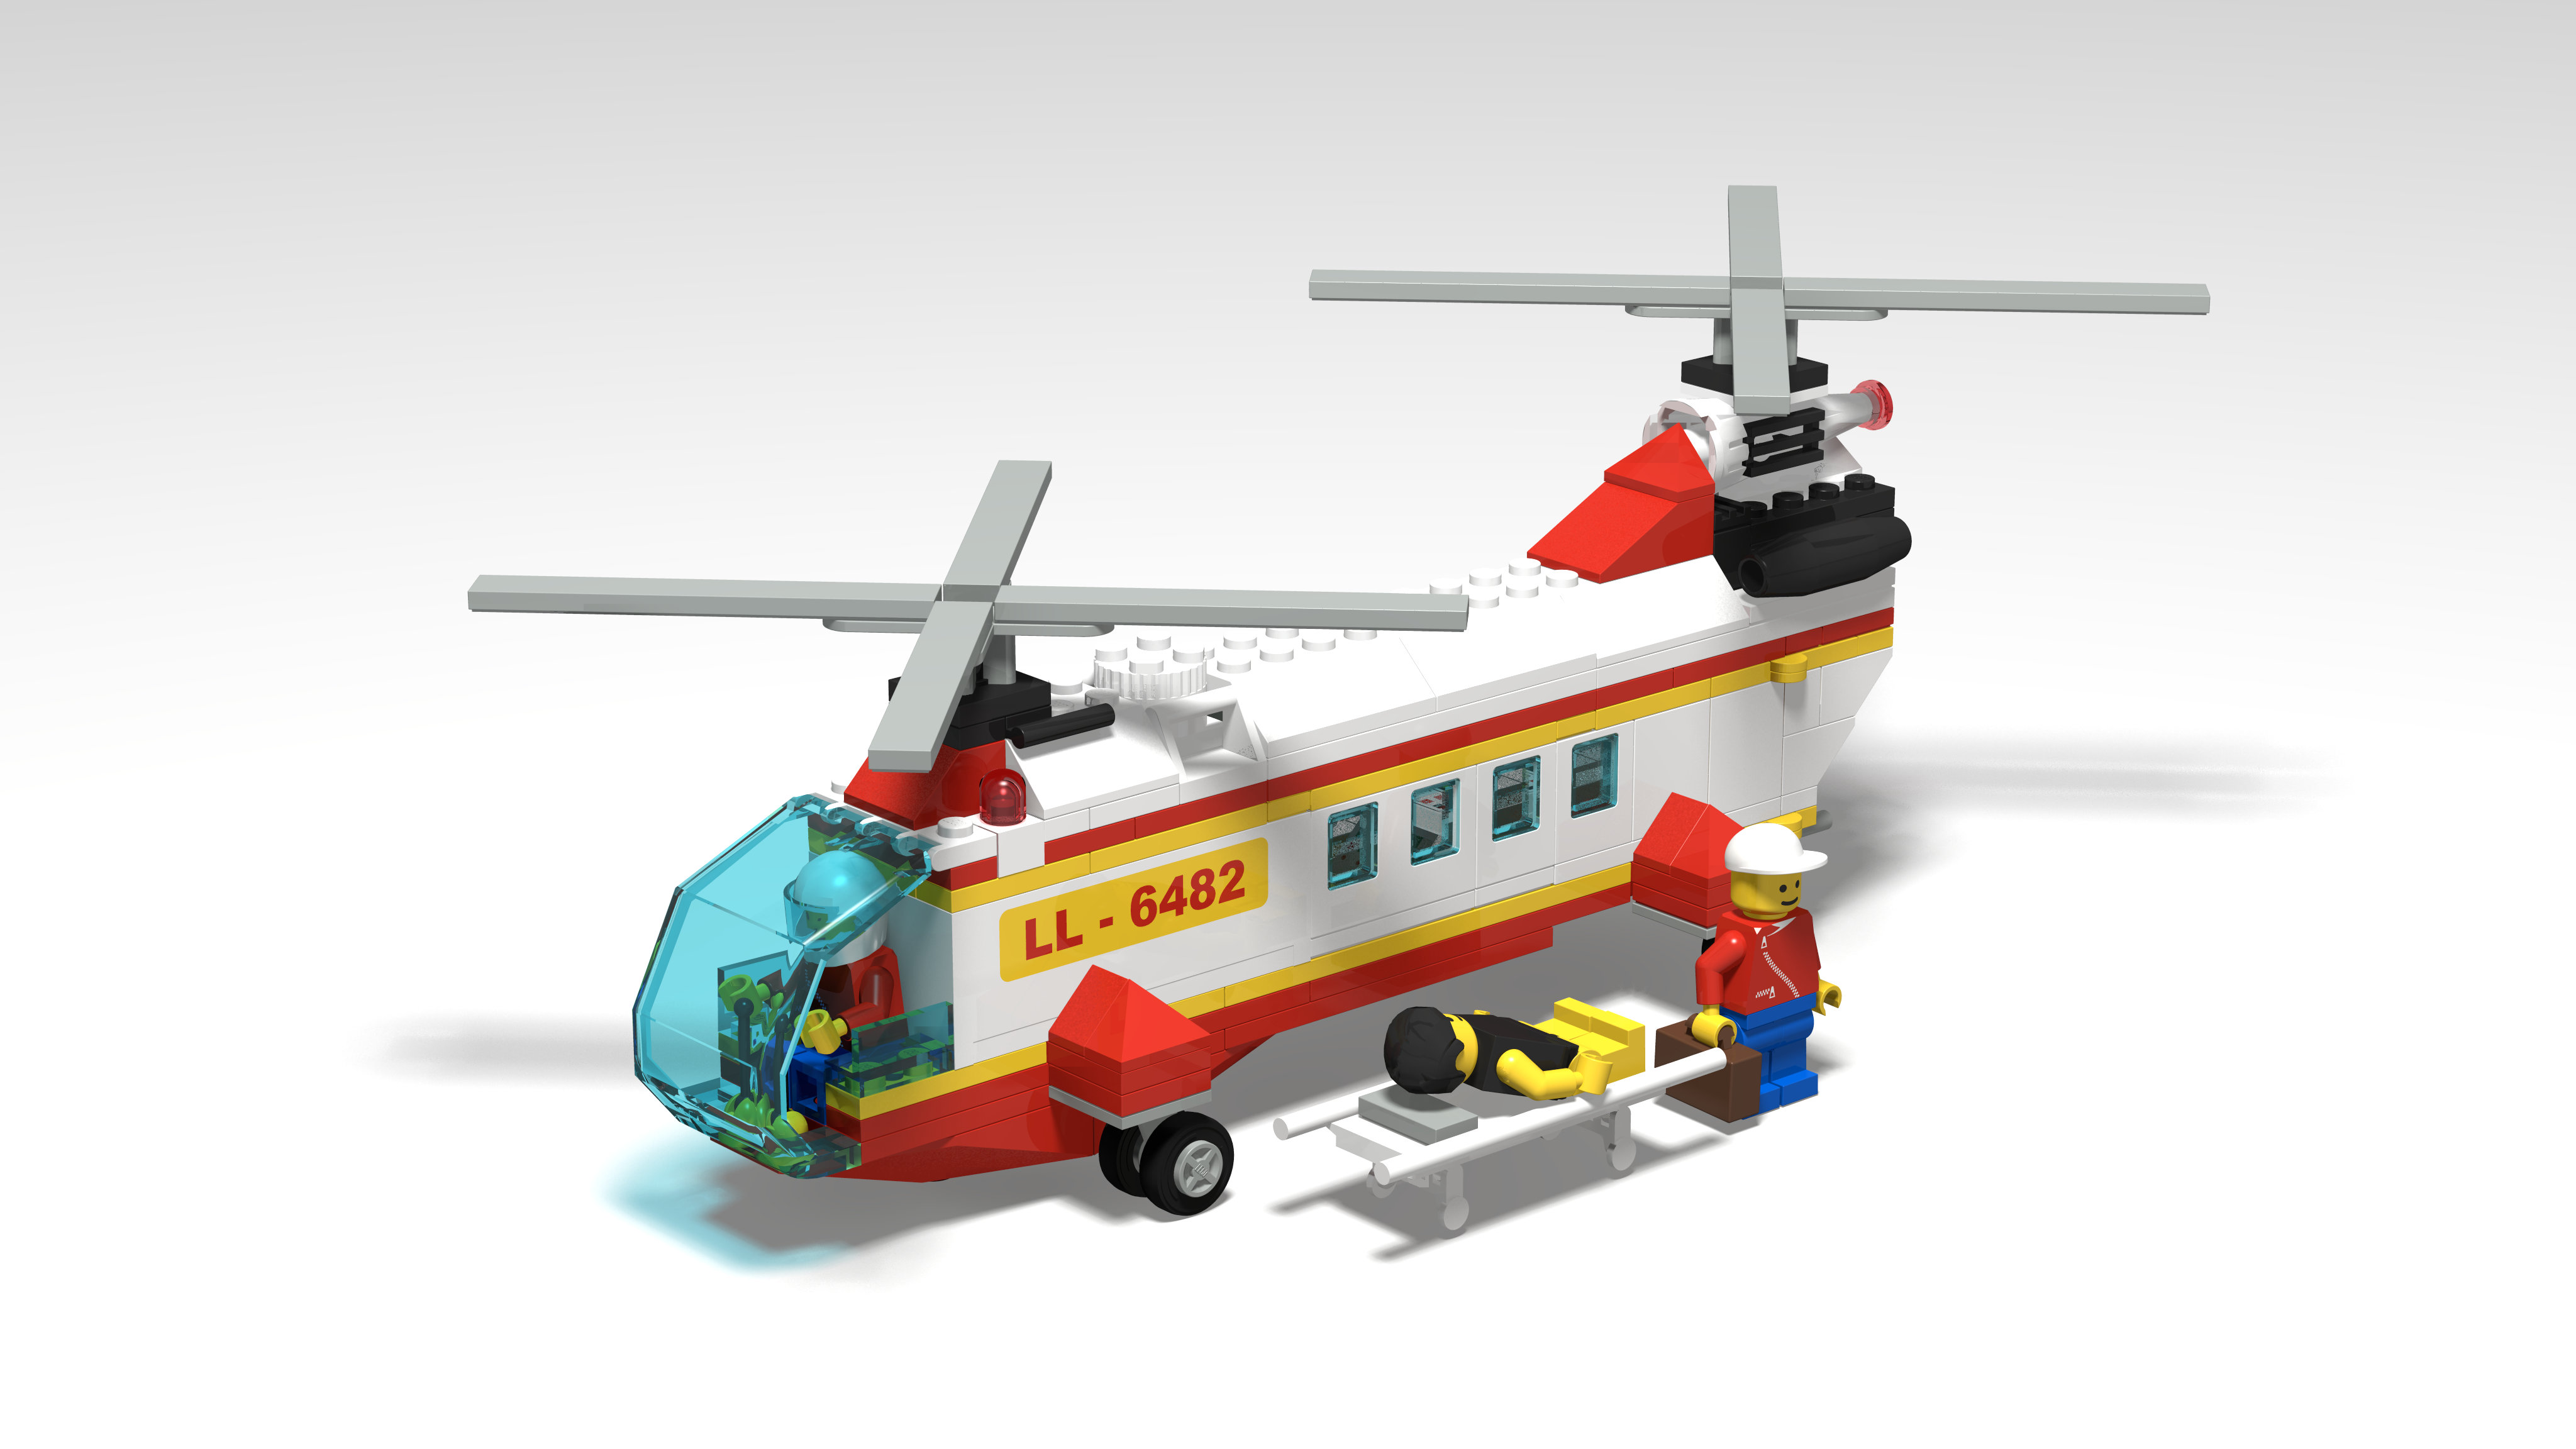 6482_rescue_helicopter.jpg